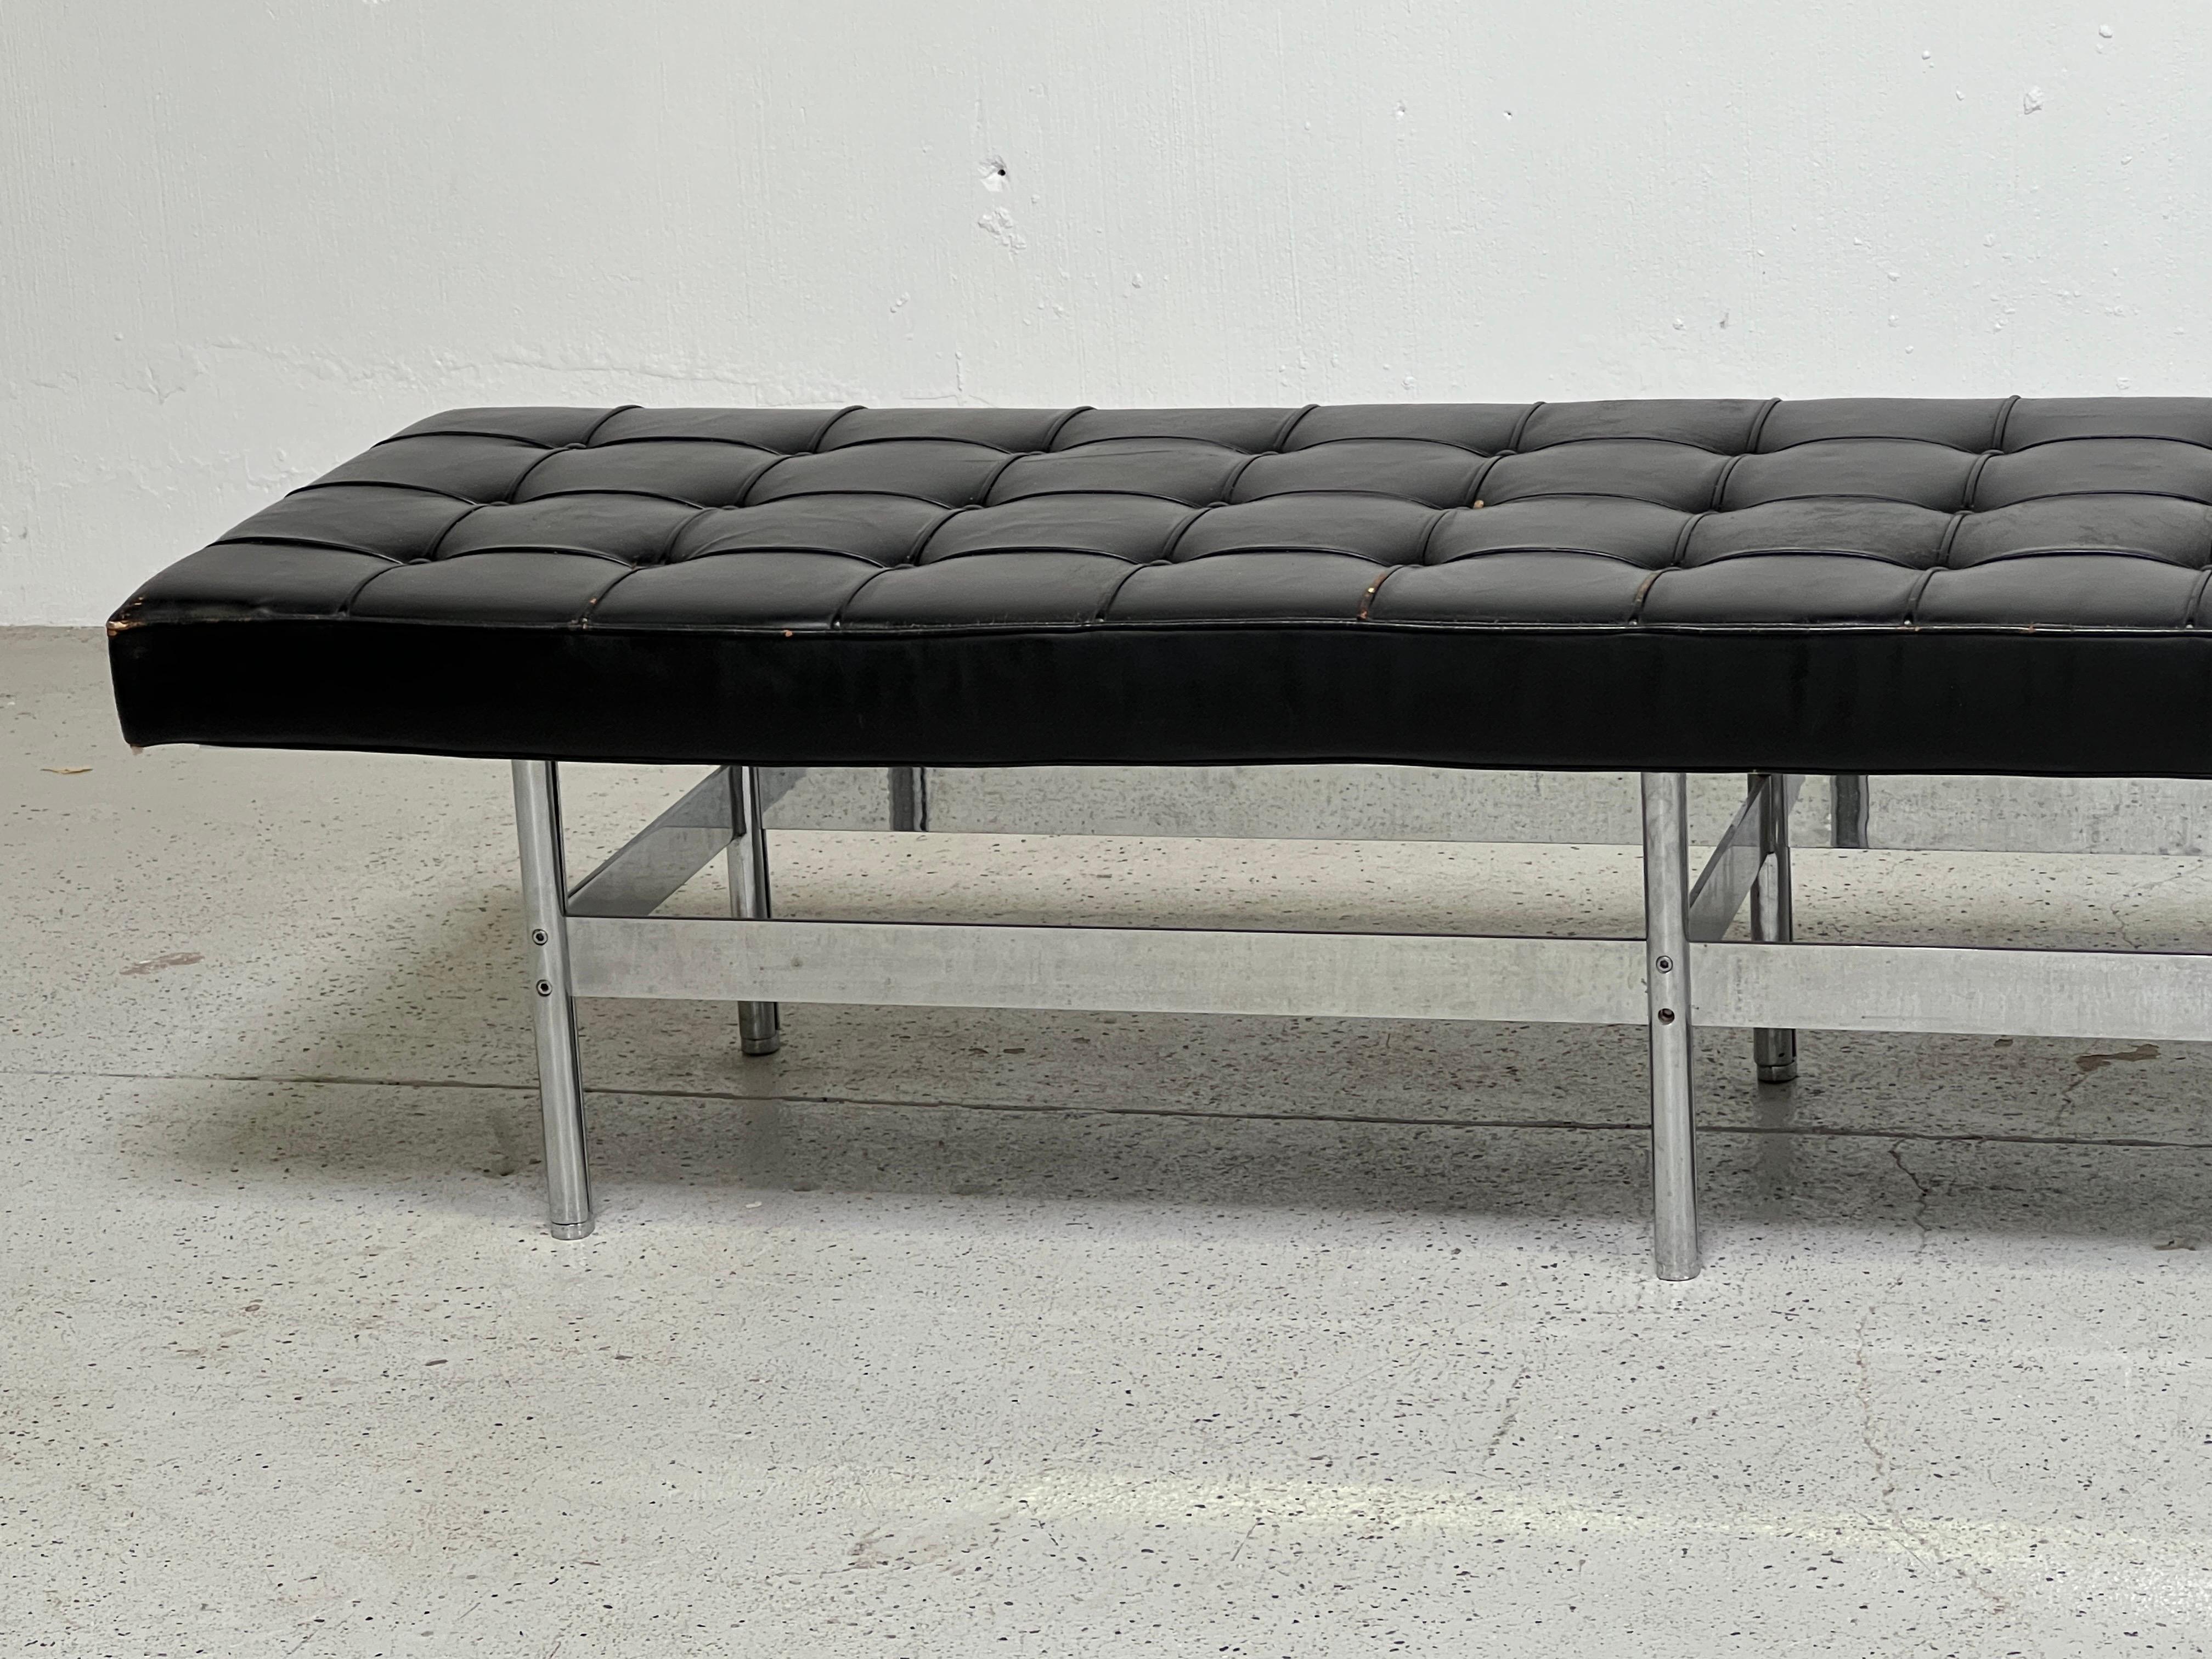 Architectural Stainless Steel and Leather Bench In Fair Condition For Sale In Dallas, TX